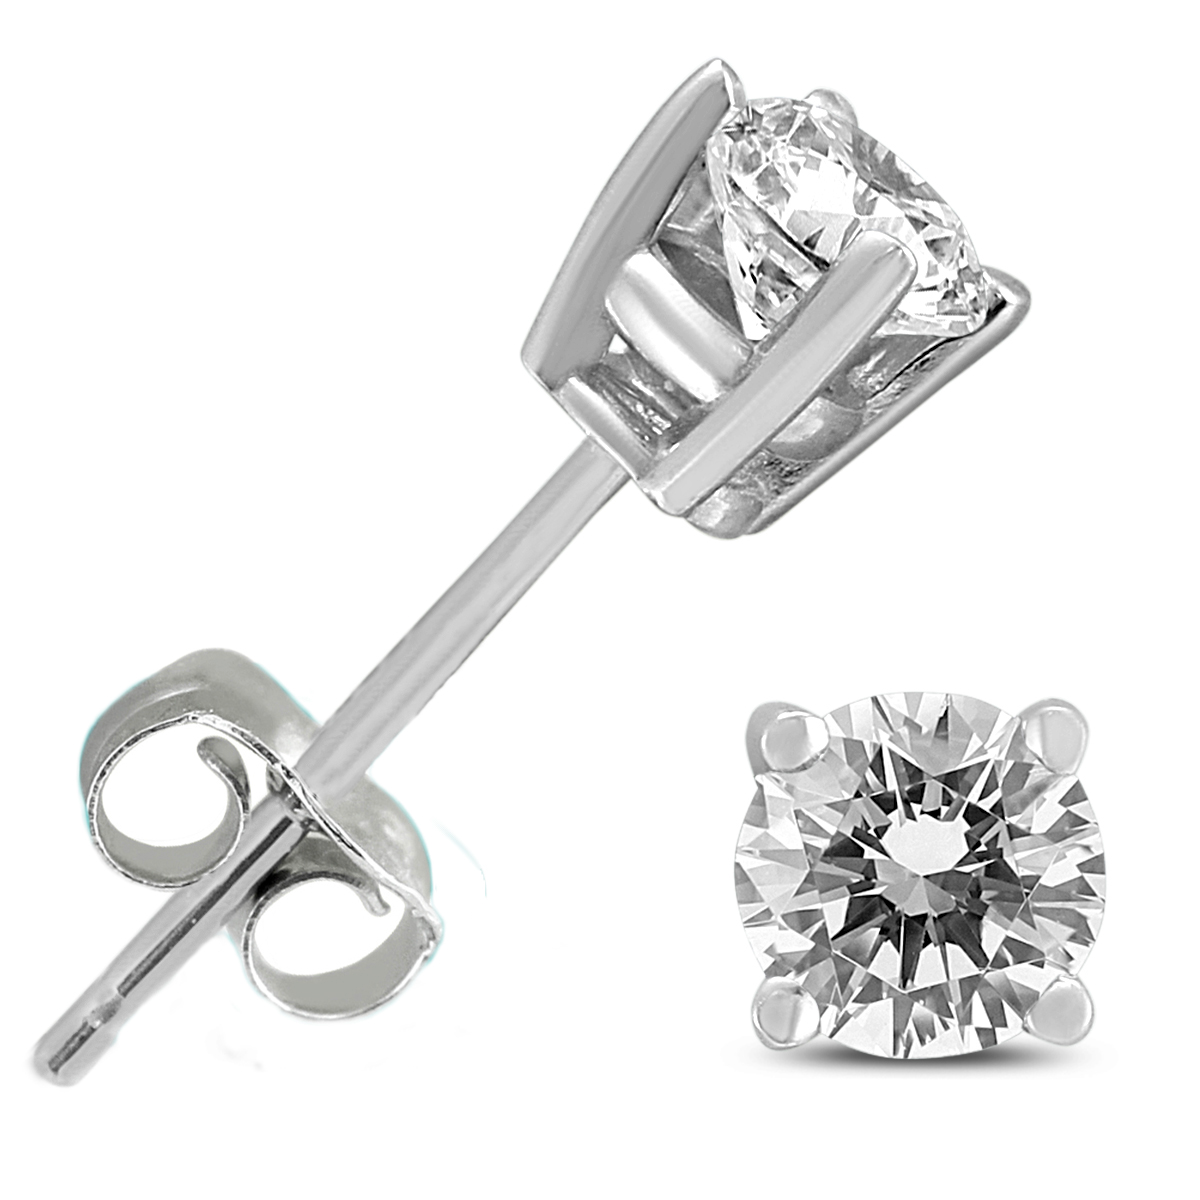 Monary 1/2 ctw Round Diamond Solitaire Stud Earrings in 14K White Gold